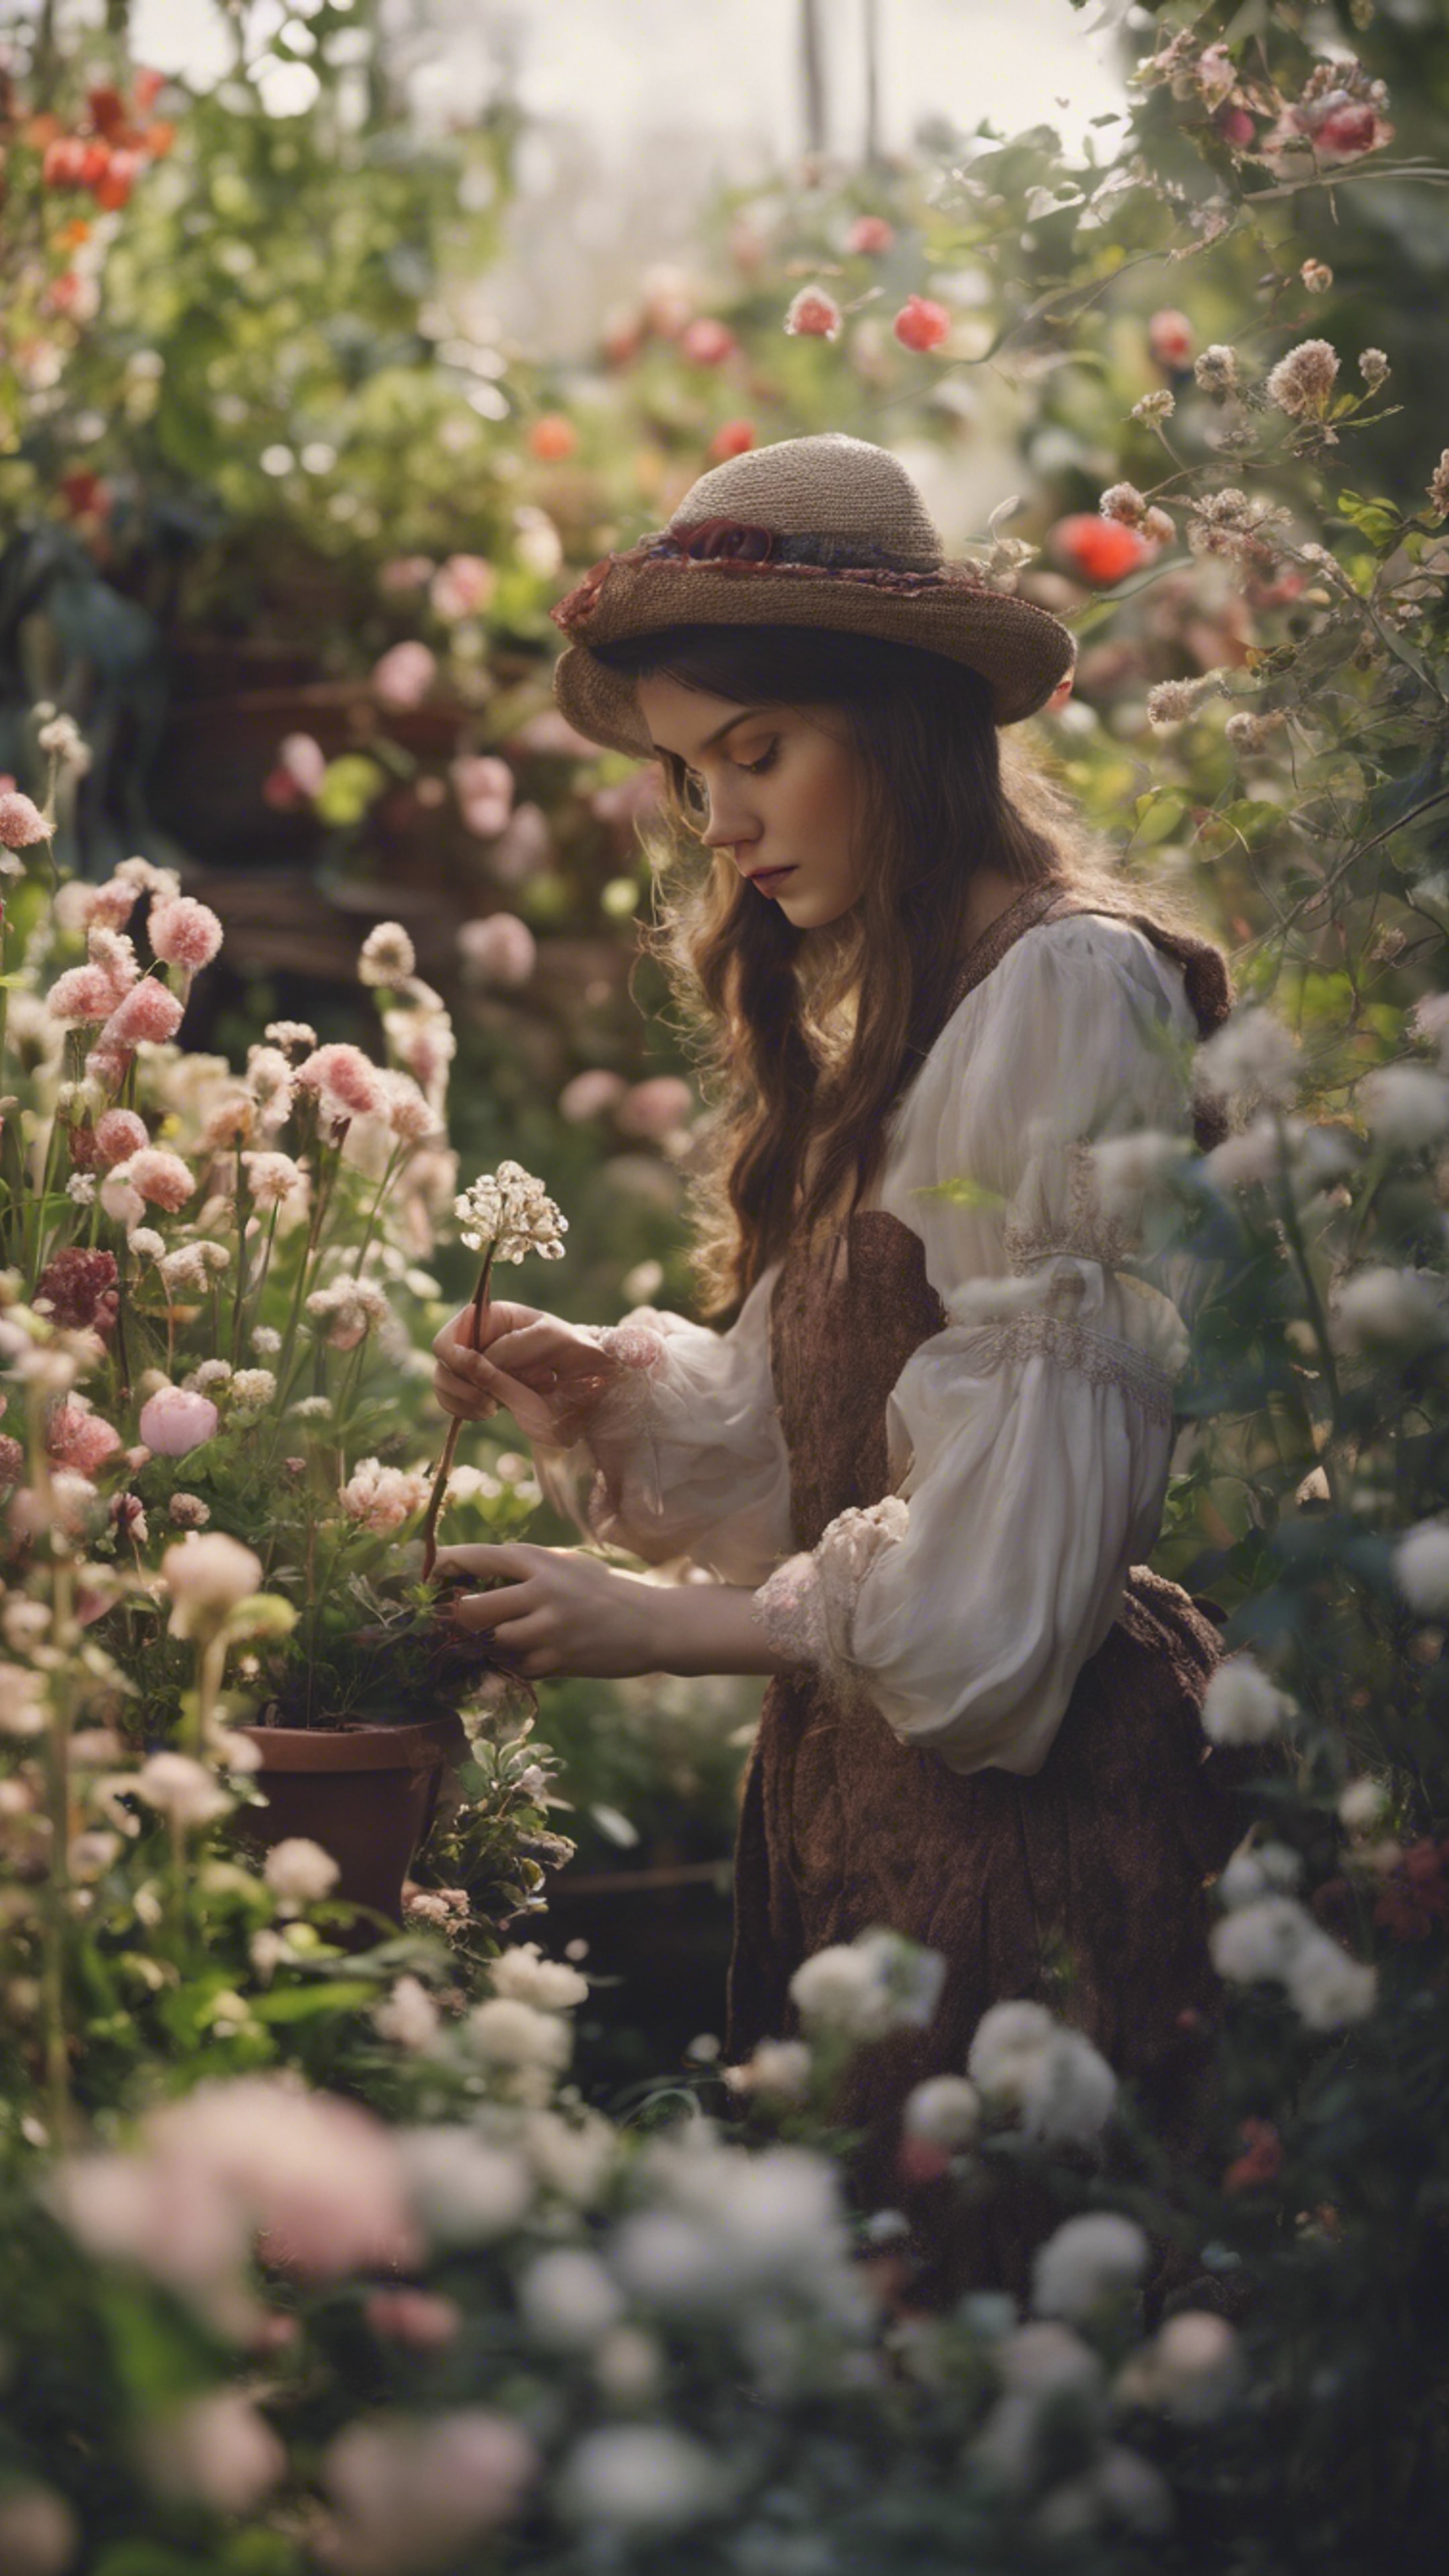 A young witch in a flower garden, tending to her magical plants. 墙纸[4b0753822f47417e91be]